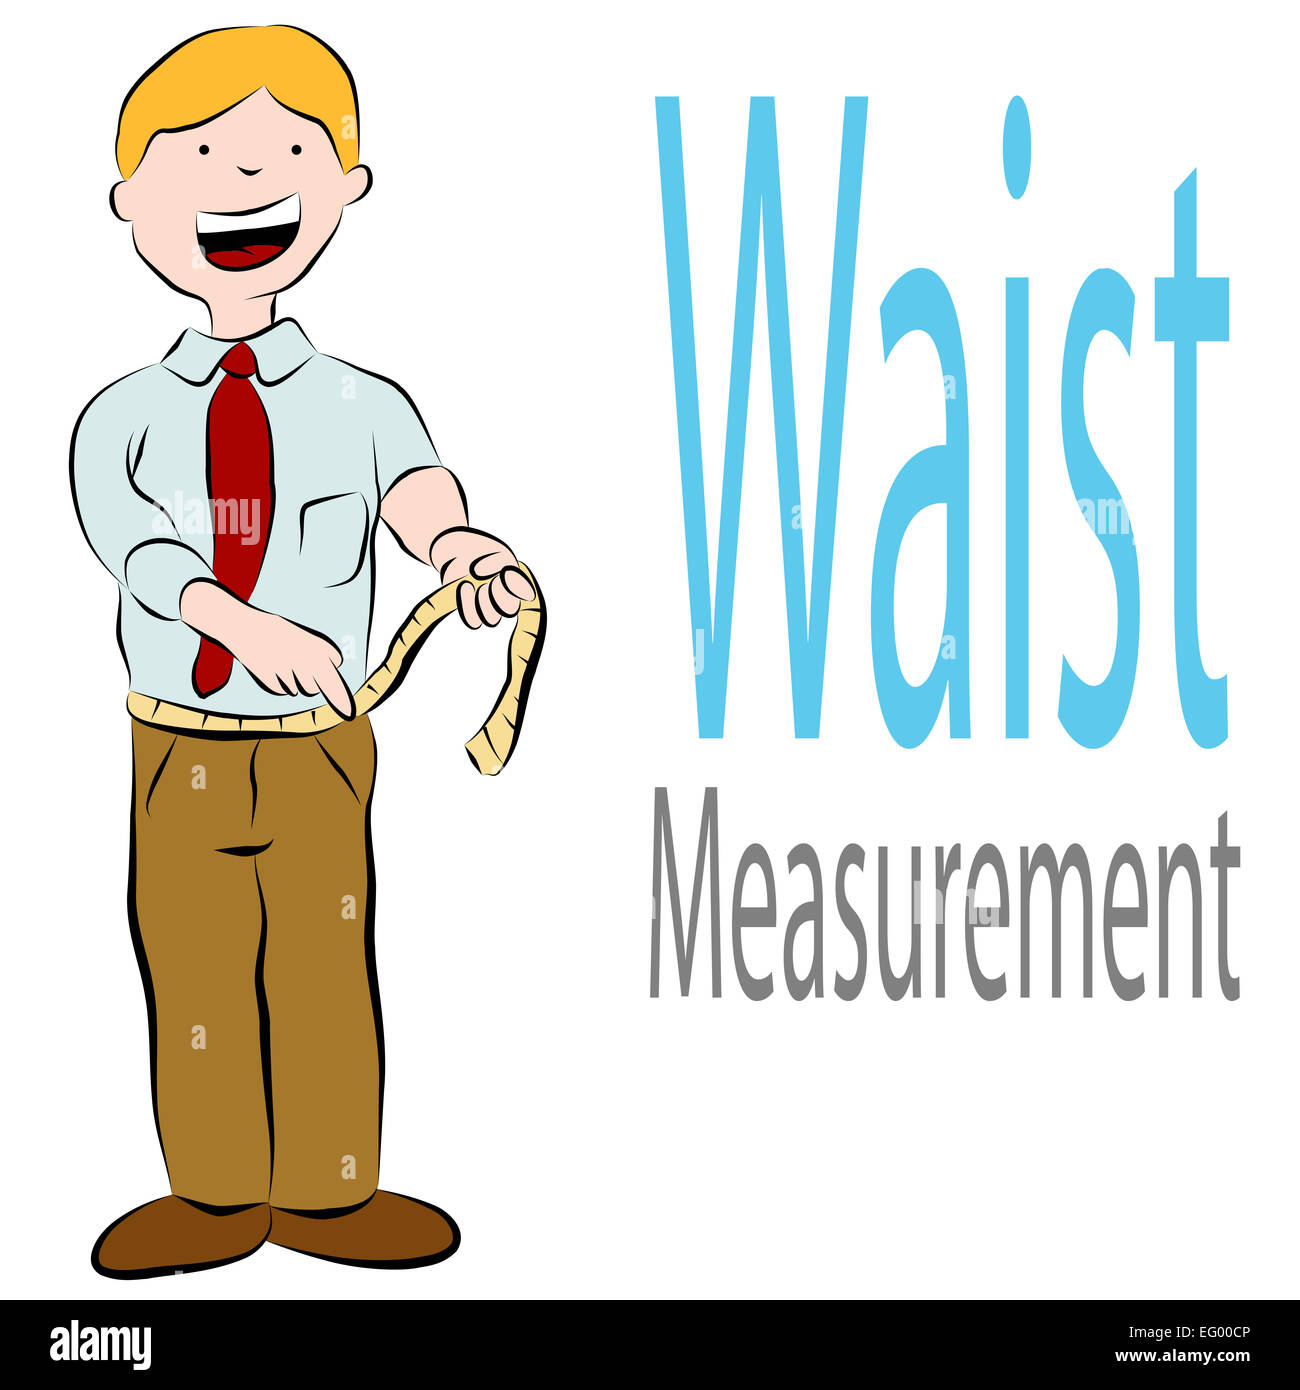 https://c8.alamy.com/comp/EG00CP/an-image-of-a-man-measuring-his-waist-with-a-tape-measure-EG00CP.jpg